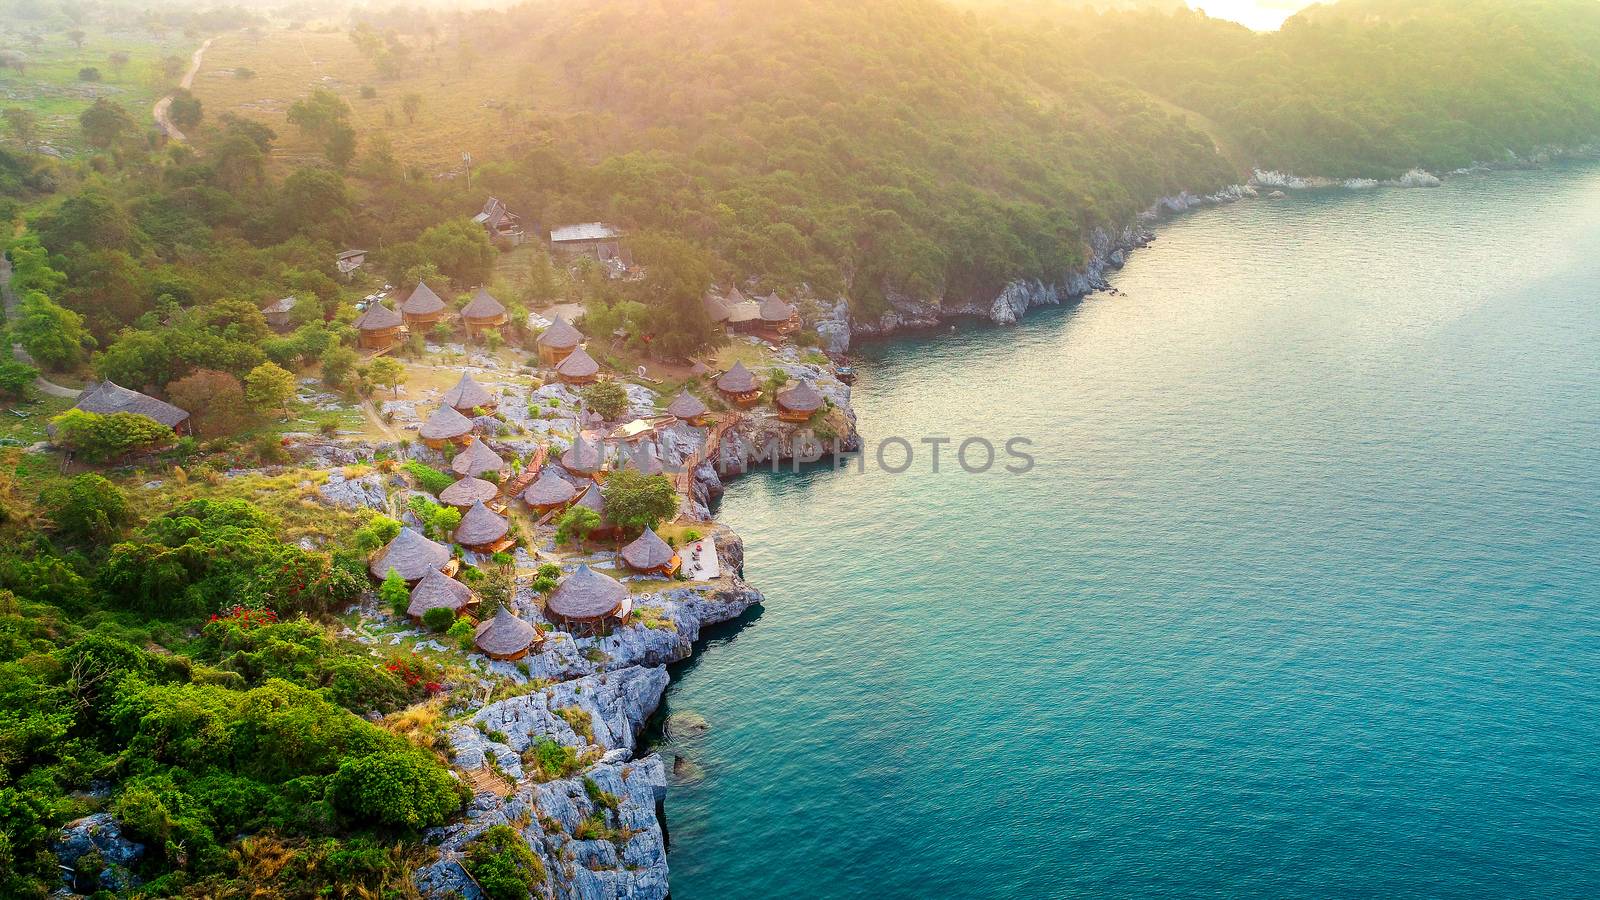 Aerial view of Cottage on the Si chang island, Thailand.